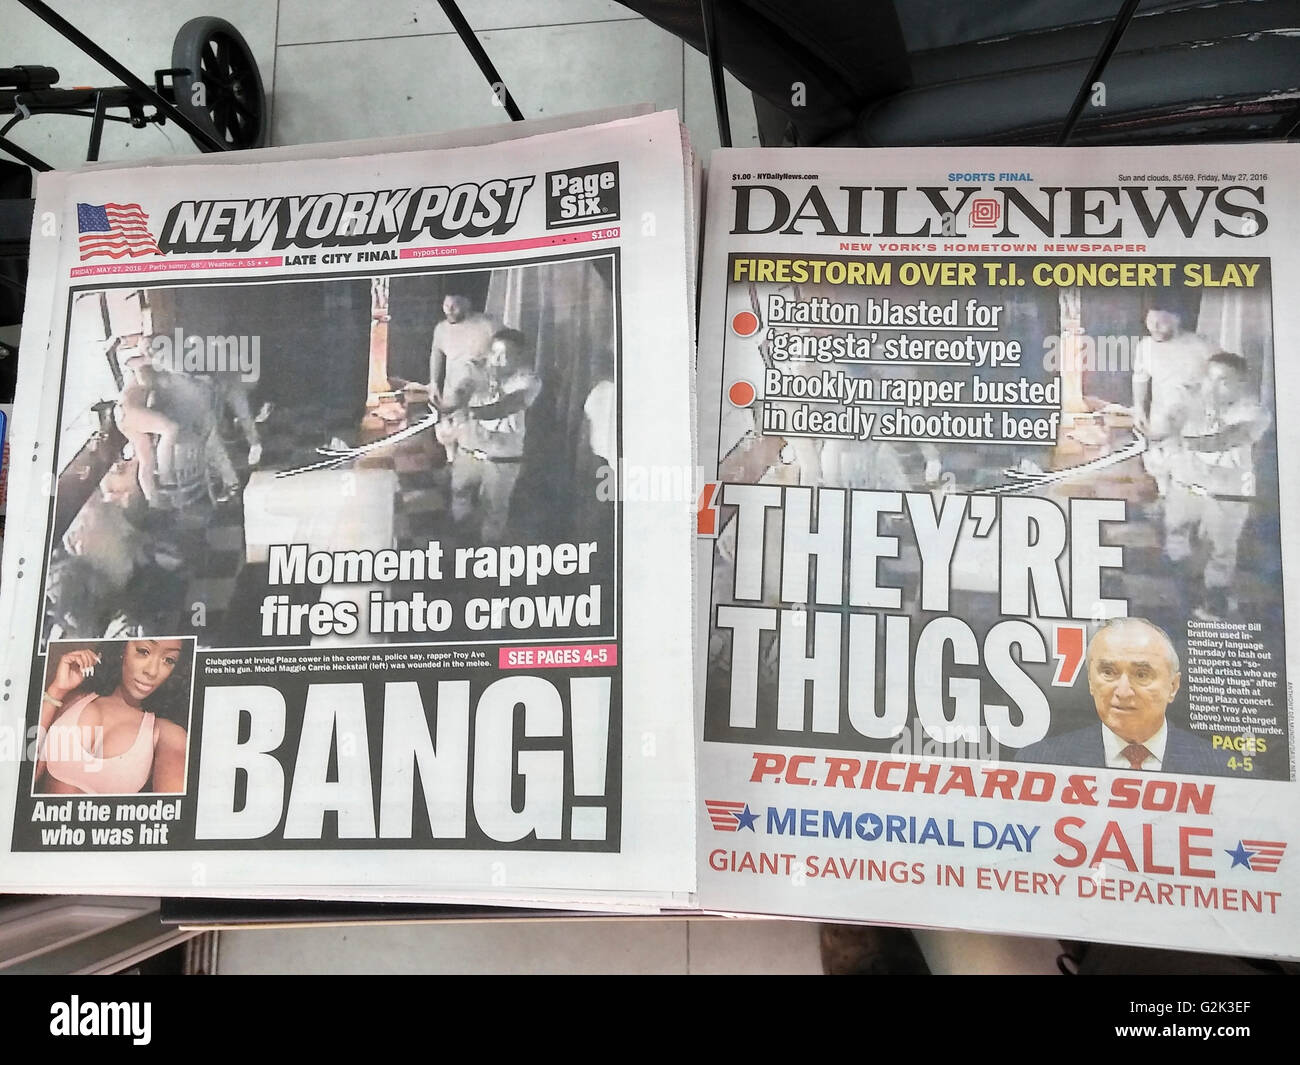 The New York Post and Daily News on Friday, May 27, 2016 both have a still from the surveillance video of the shooting in Irving Plaza that involved rapper Troy Ave and his entourage. (© Richard B. Levine) Stock Photo